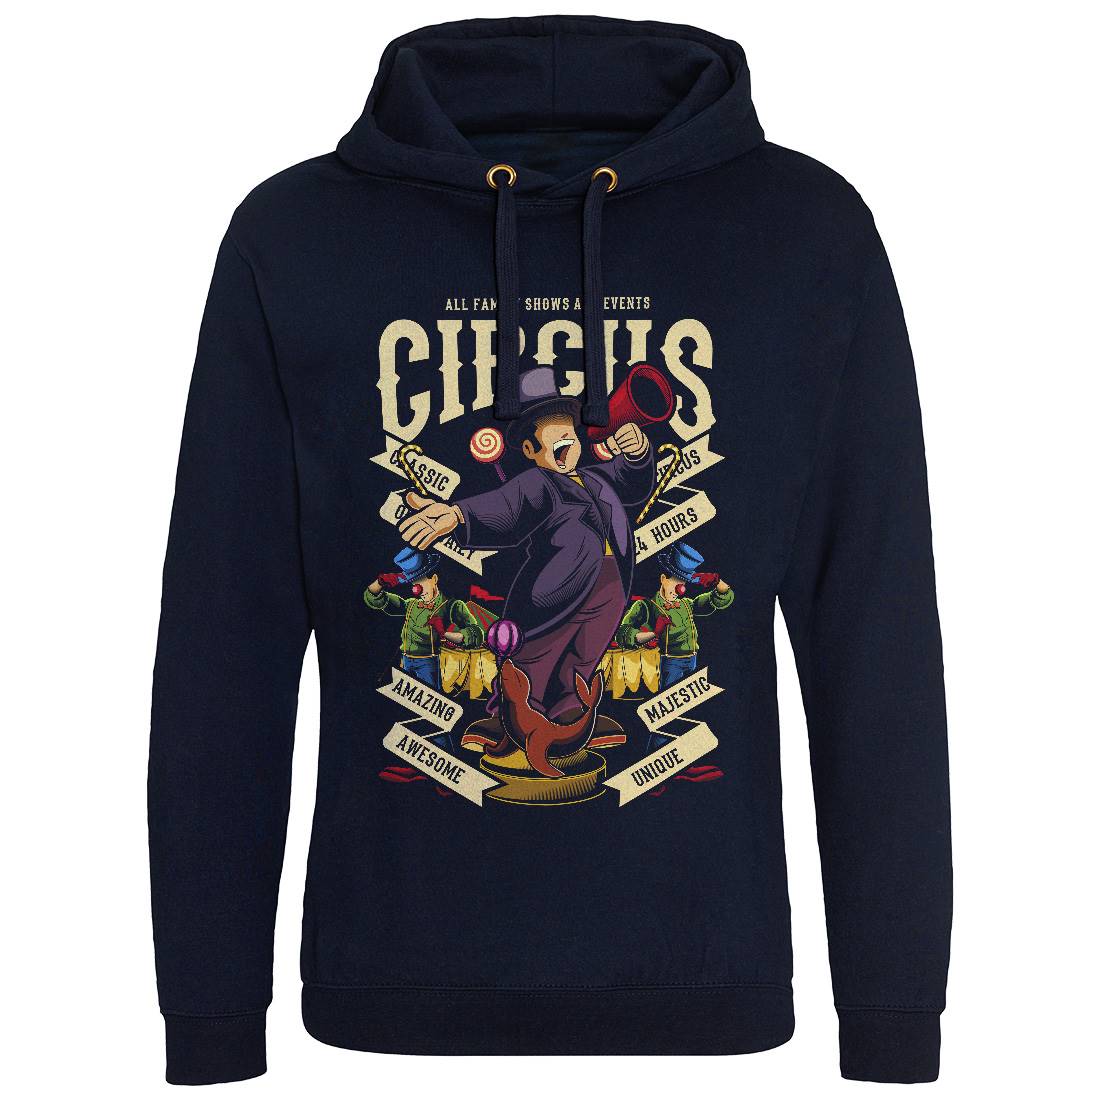 Circus Mens Hoodie Without Pocket Retro C328